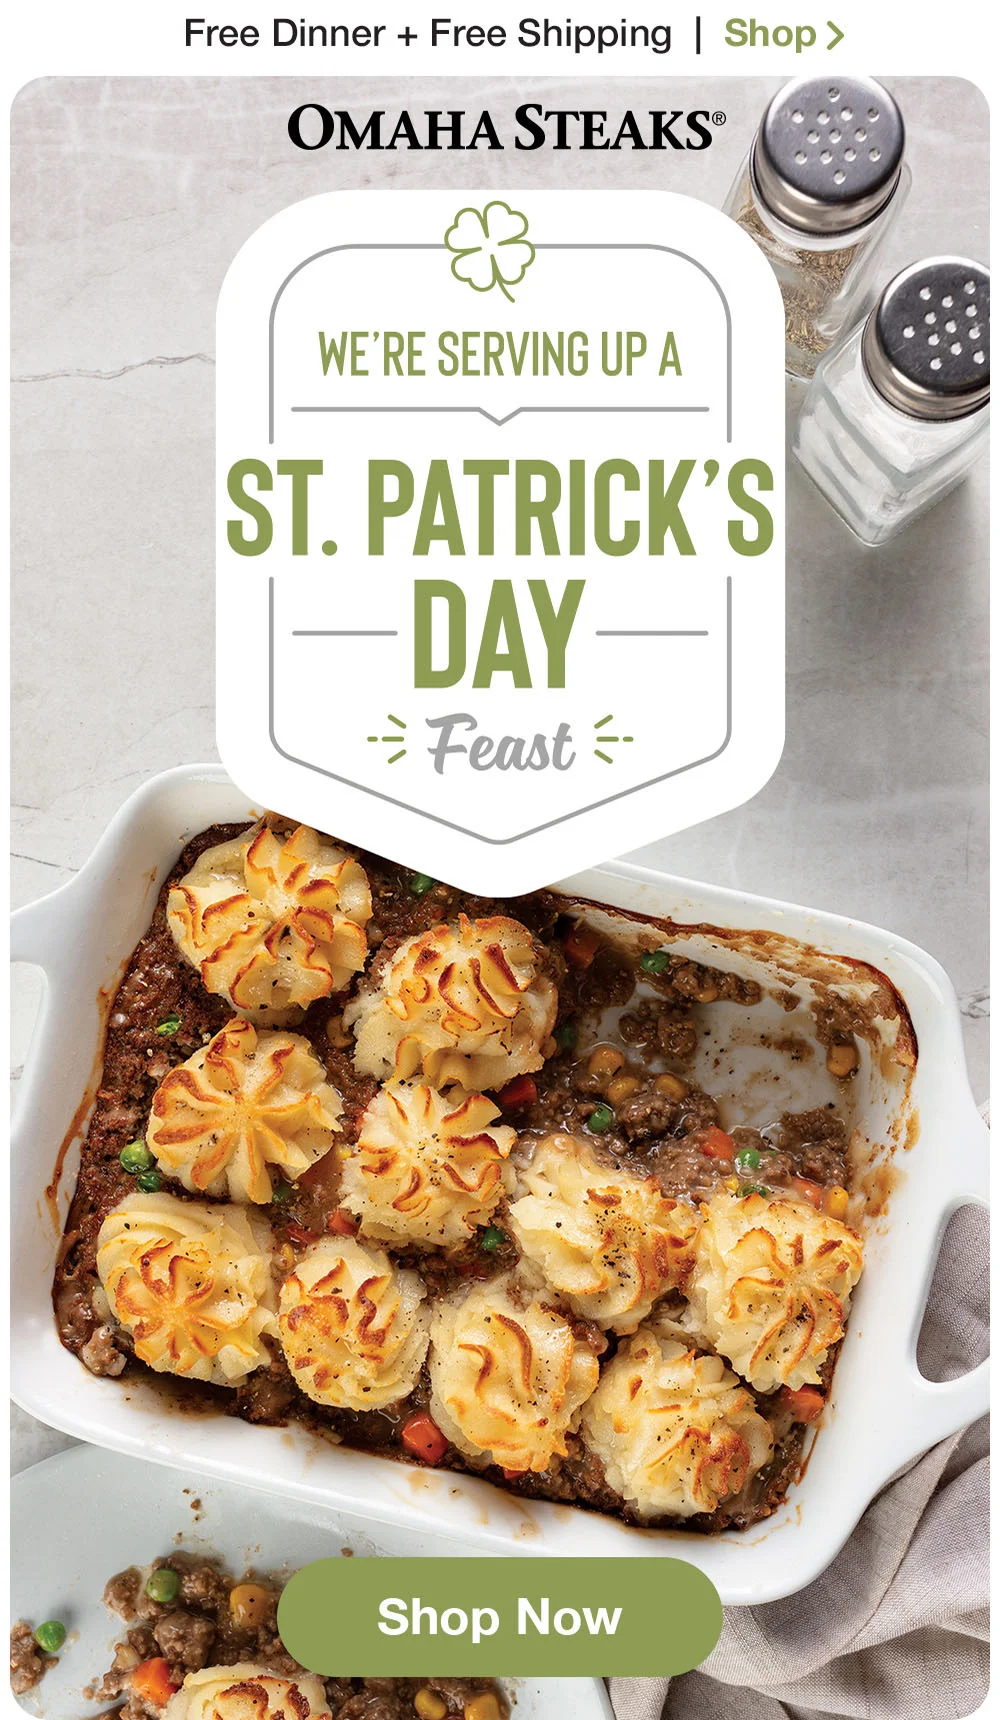 Free Dinner + Free Shipping | Shop > OMAHA STEAKS® | WE'RE SERVING UP A ST. PATRICK'S DAY FEAST || Shop Now